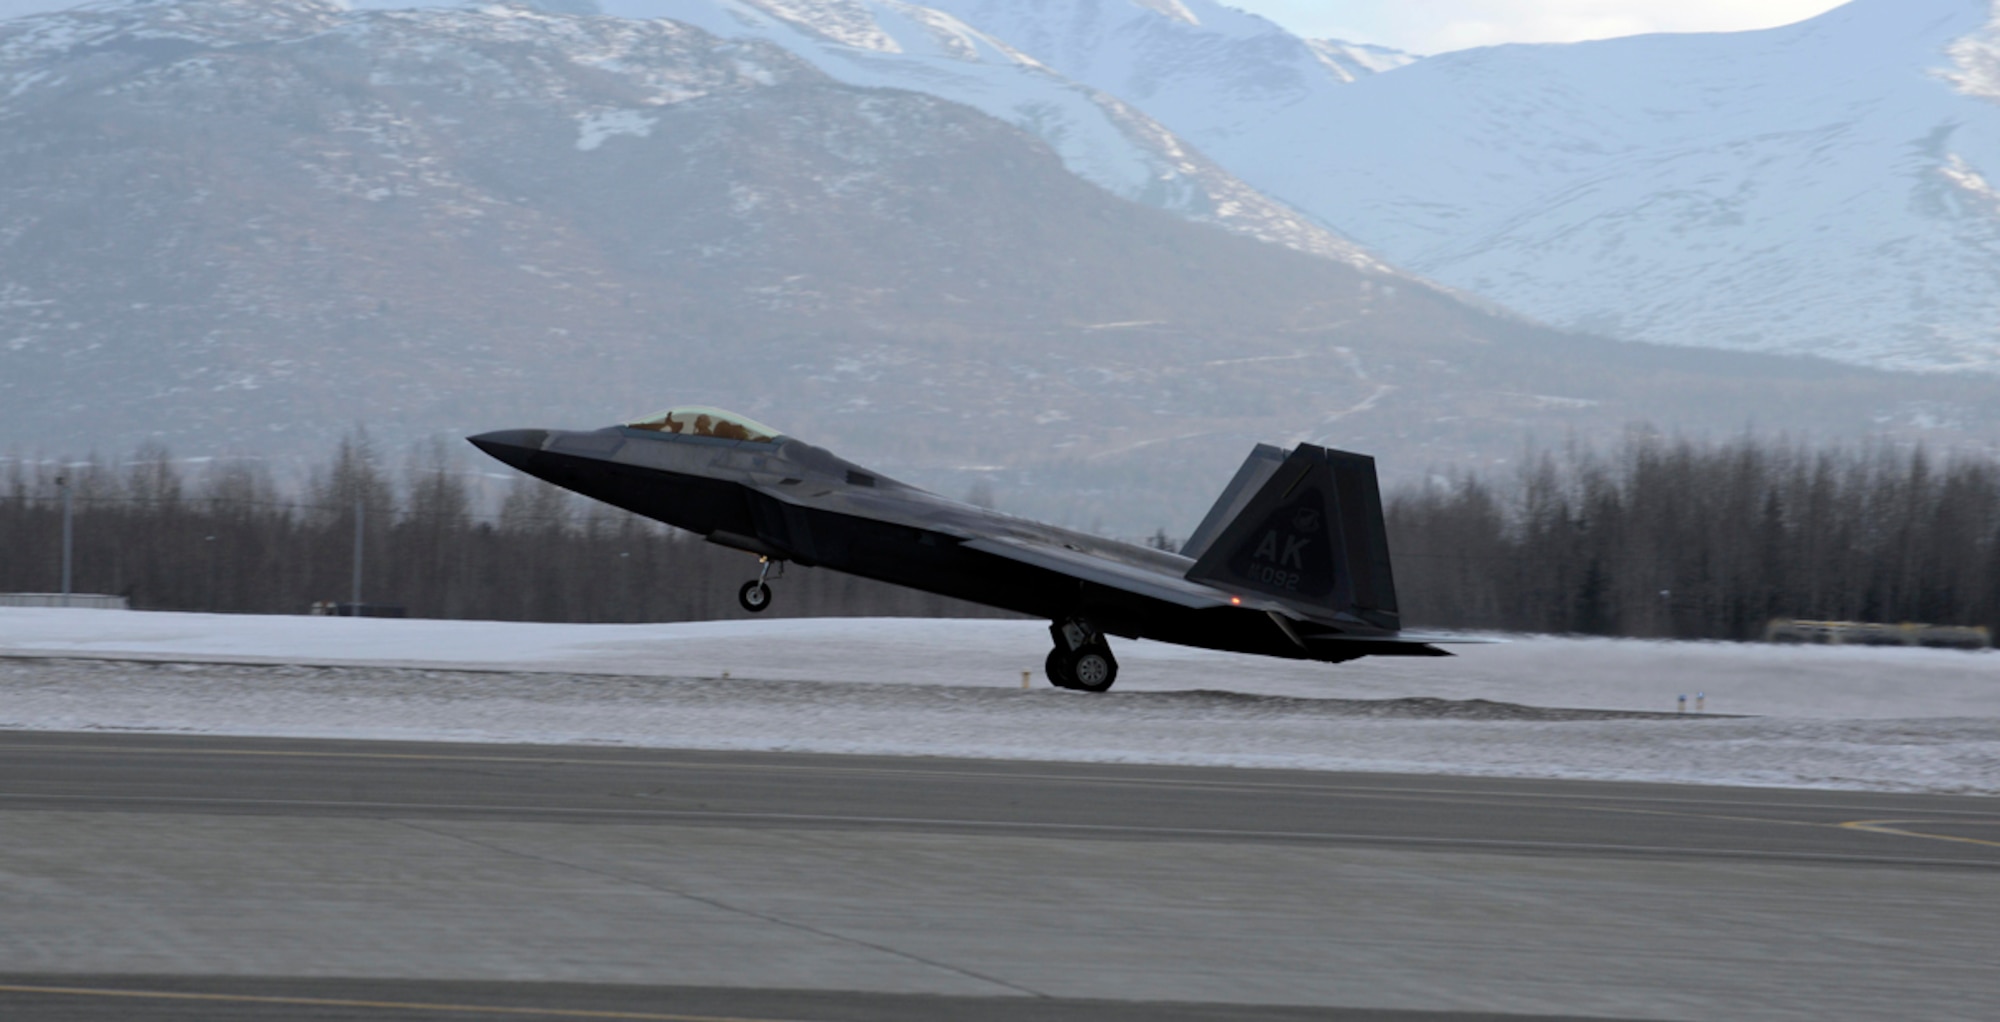 An F-22 Raptor assigned to the 90th Fighter Squadron lands on Joint Base Elmendorf-Richardson, Alaska, during a rapid raptor scenario during Exercise Polar Force 14-2, Feb. 10, 2014. During the exercise, the 3rd Wing practiced the new Rapid Raptor strategy that will enable combat-ready F-22s to rapidly refuel, rearm and redeploy. (U.S. Air Force photo/Staff Sgt. Sheila deVera)